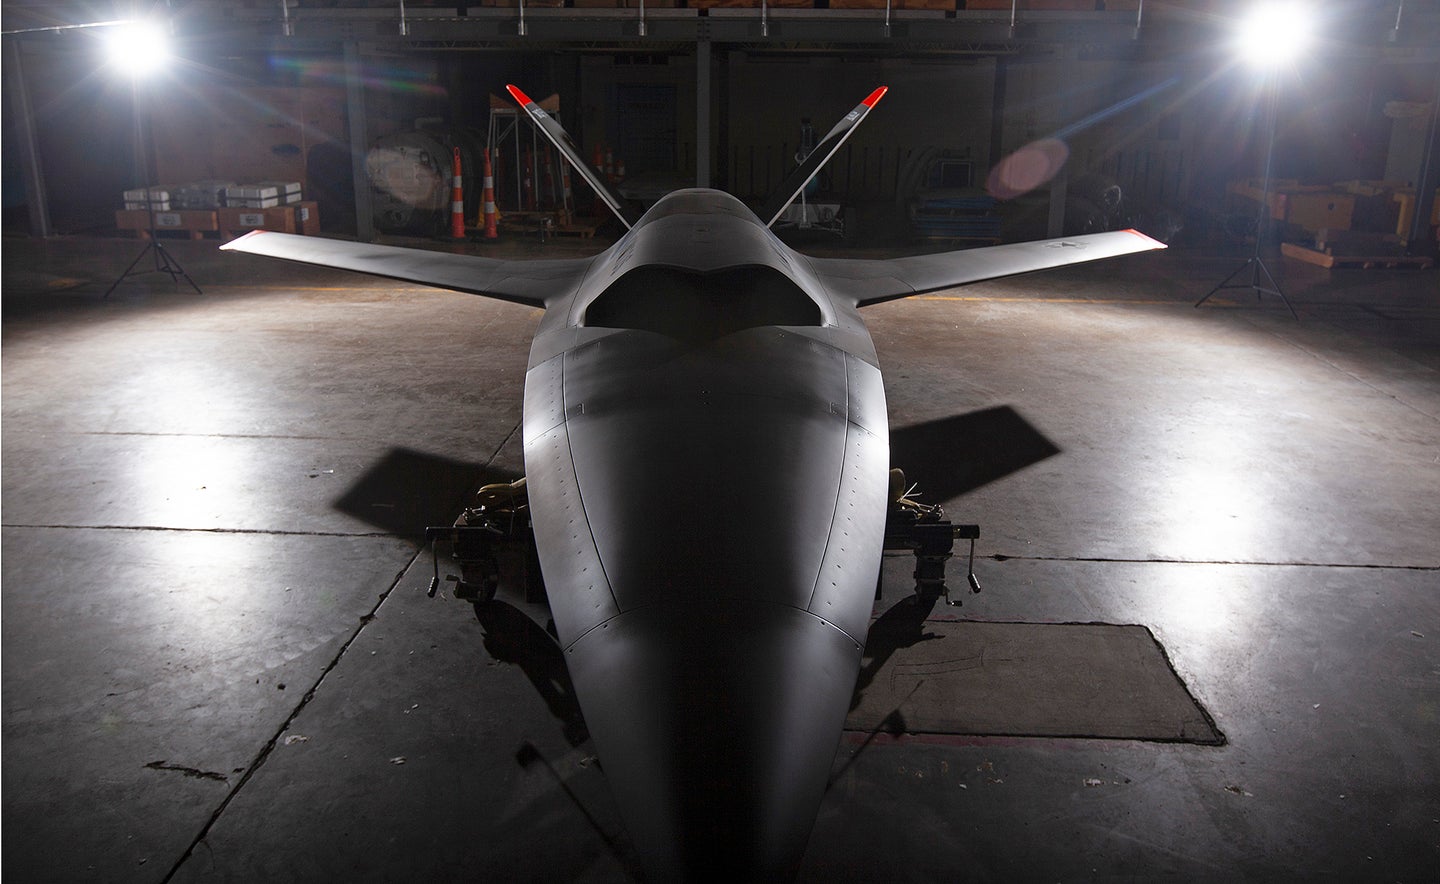 Kratos Says Secret “Off-Board Sensing Station” Unmanned Aircraft Will Be Transformative